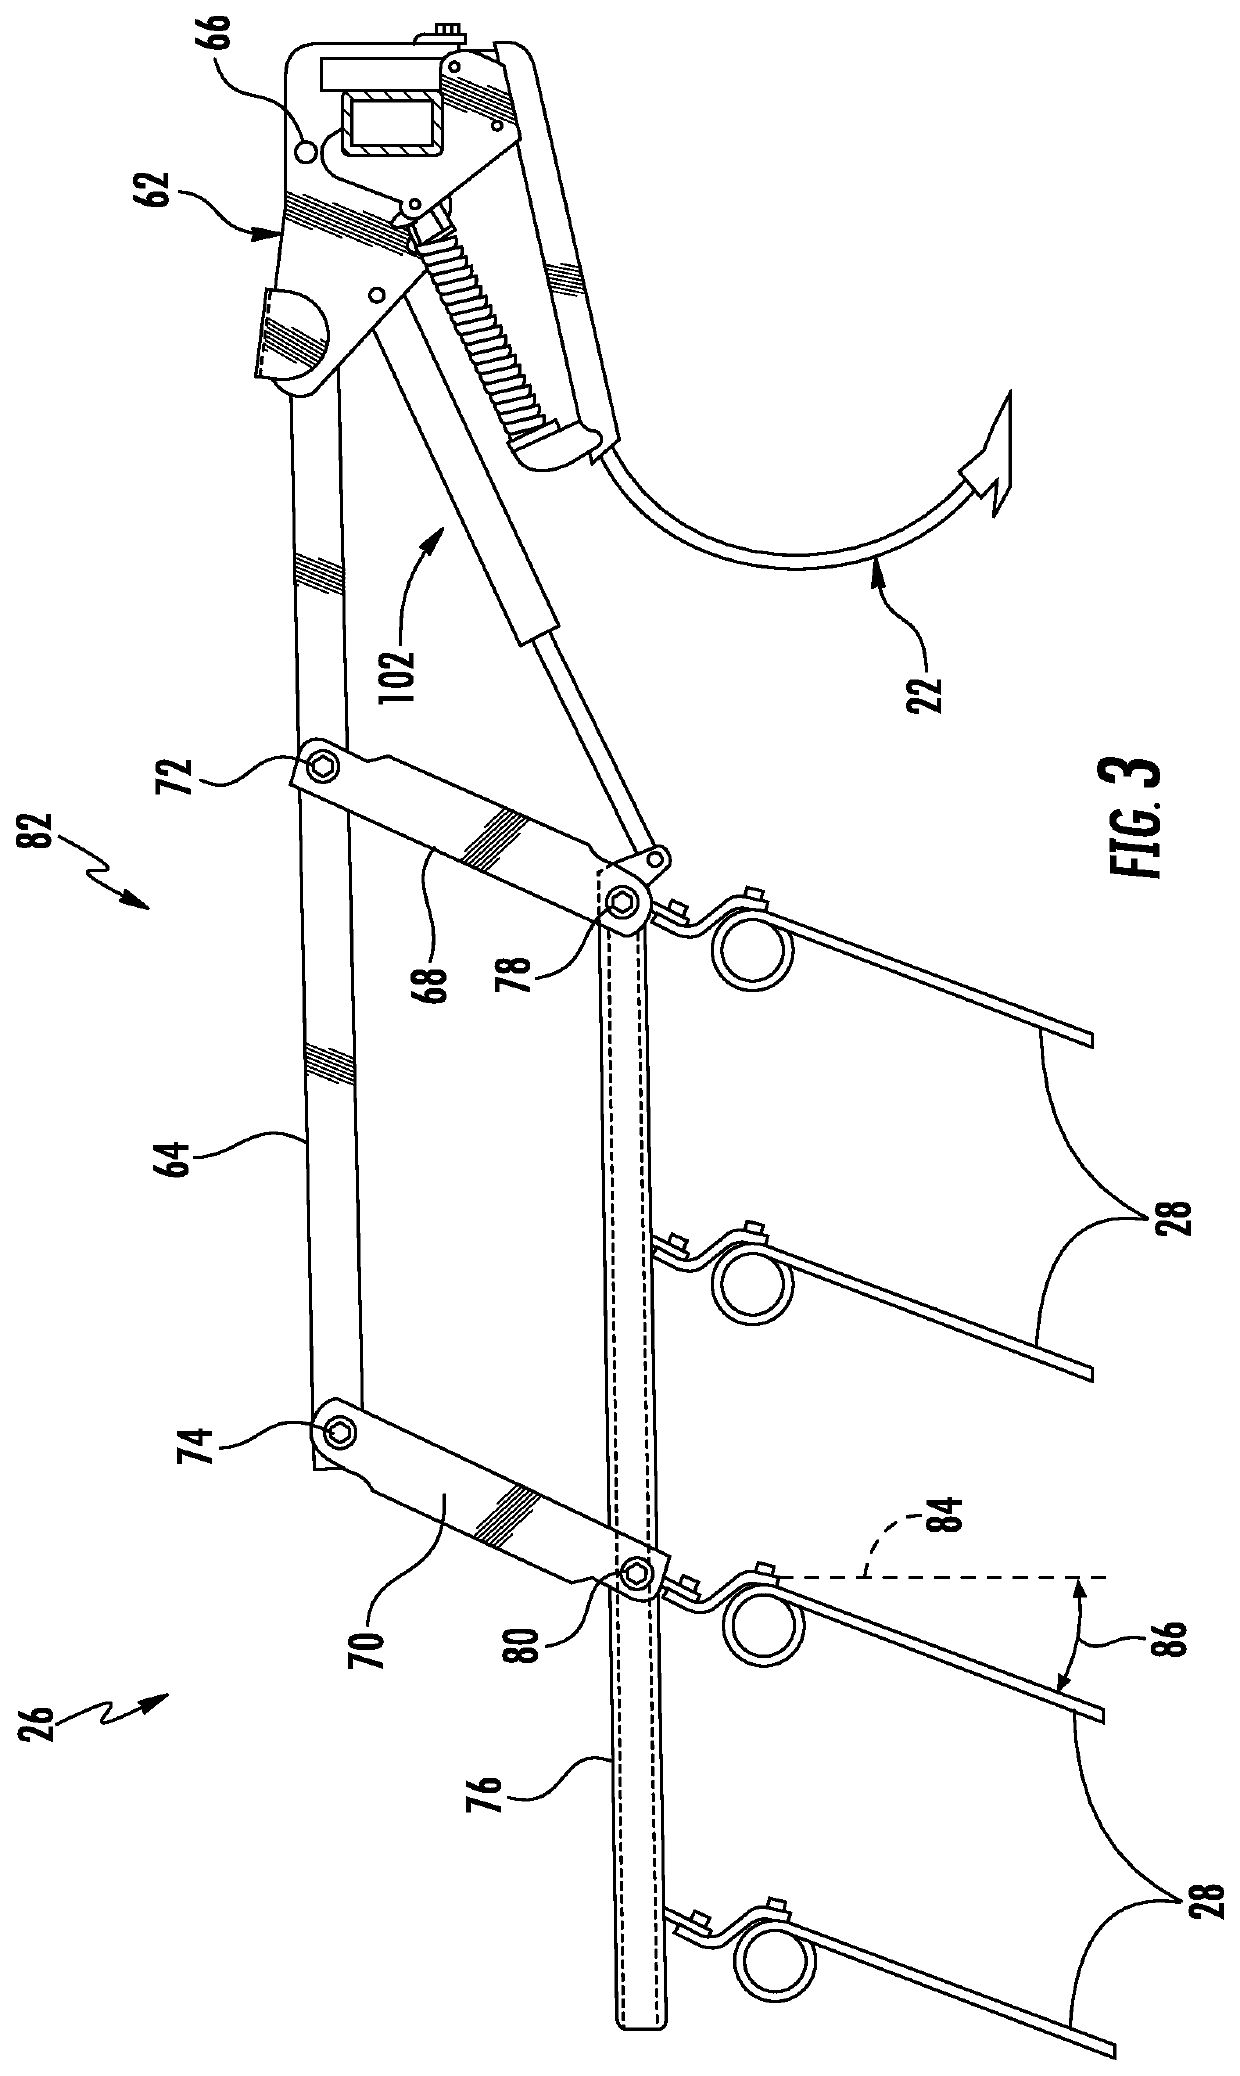 System and method for controlling the orientation of ground engaging elements on an agricultural implement